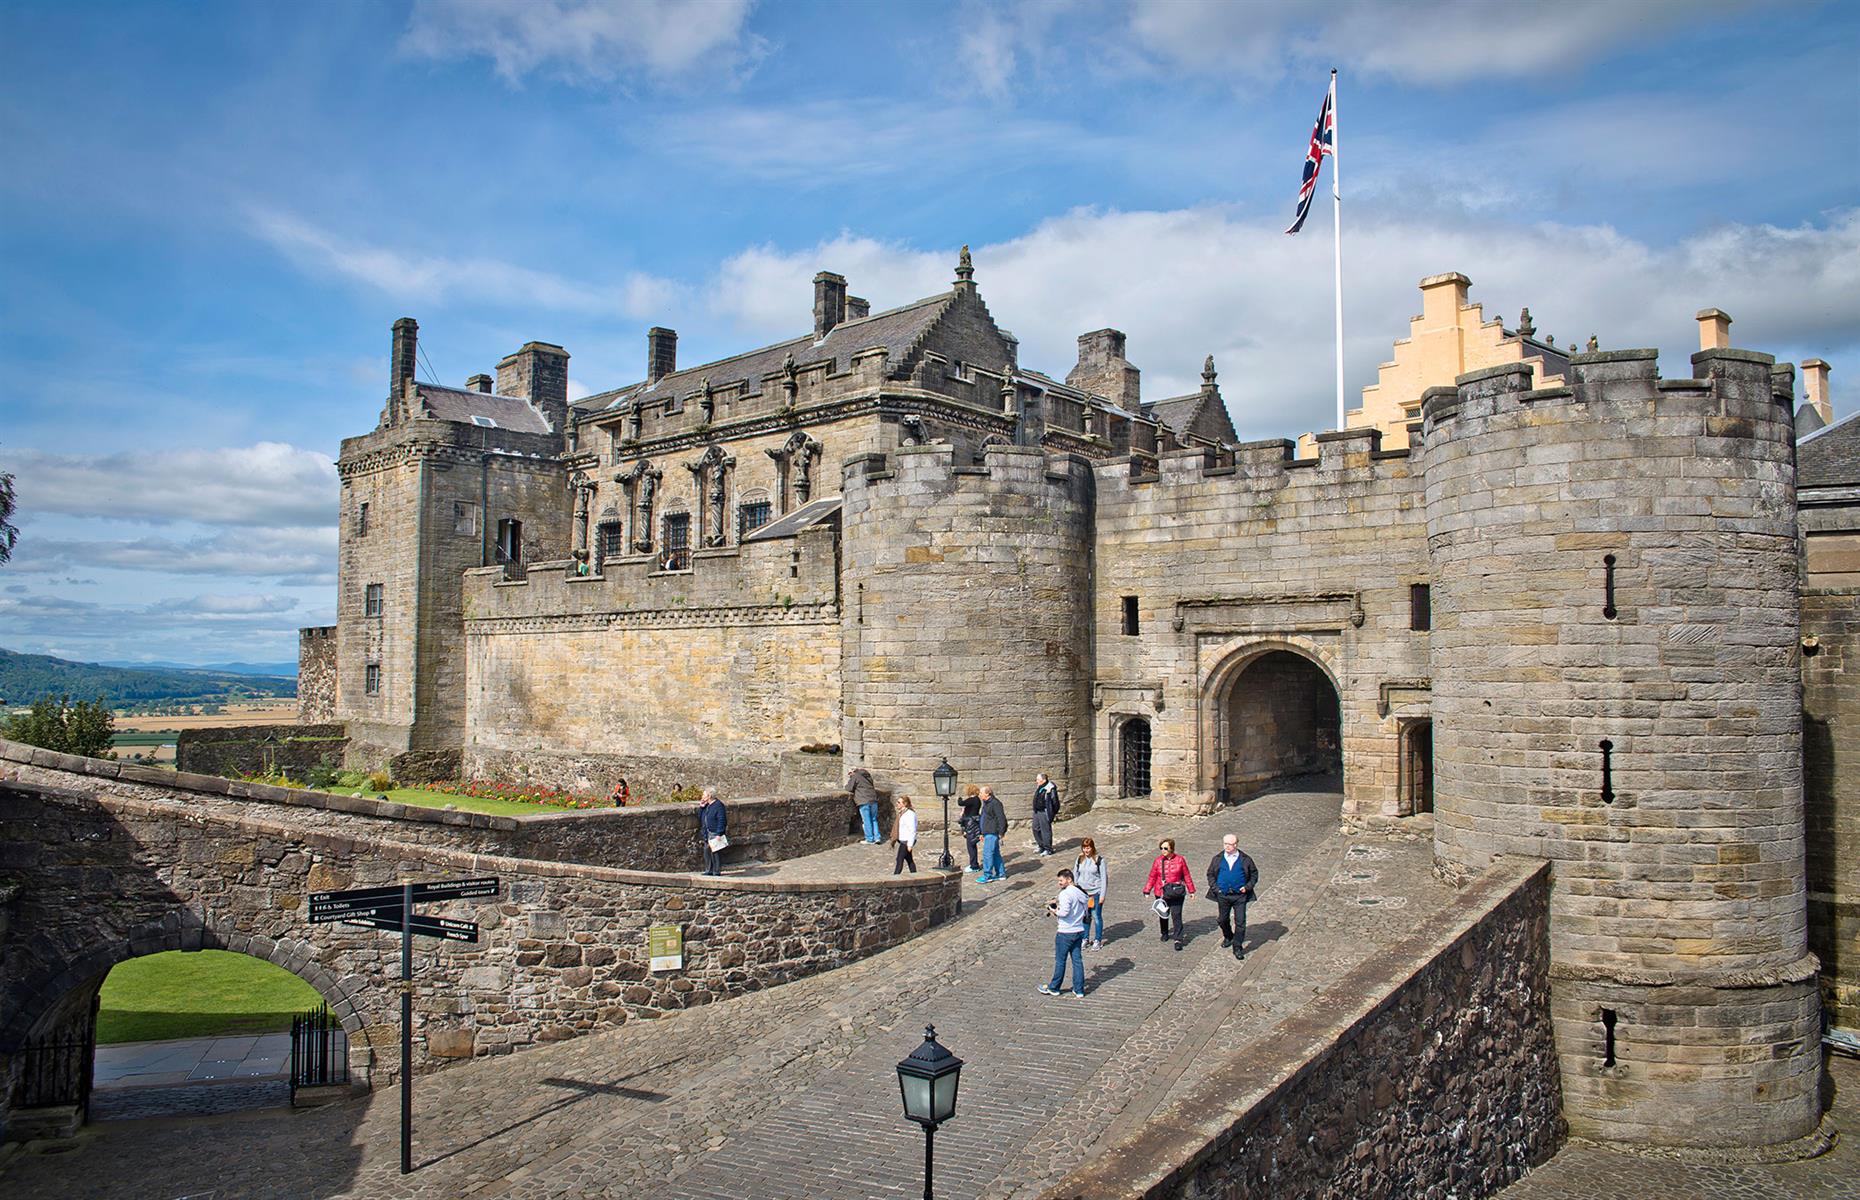 <p>This <a href="https://www.stirlingcastle.scot/">castle</a>, located between the Highlands and the Lowlands, was once so integral to the swing of power in the country that it was said ‘he who holds Stirling, holds Scotland’. For this reason, it’s one of the most besieged castles, and though it fell into disrepair for many years, careful restoration has returned some of the interiors to their Renaissance glory.</p>